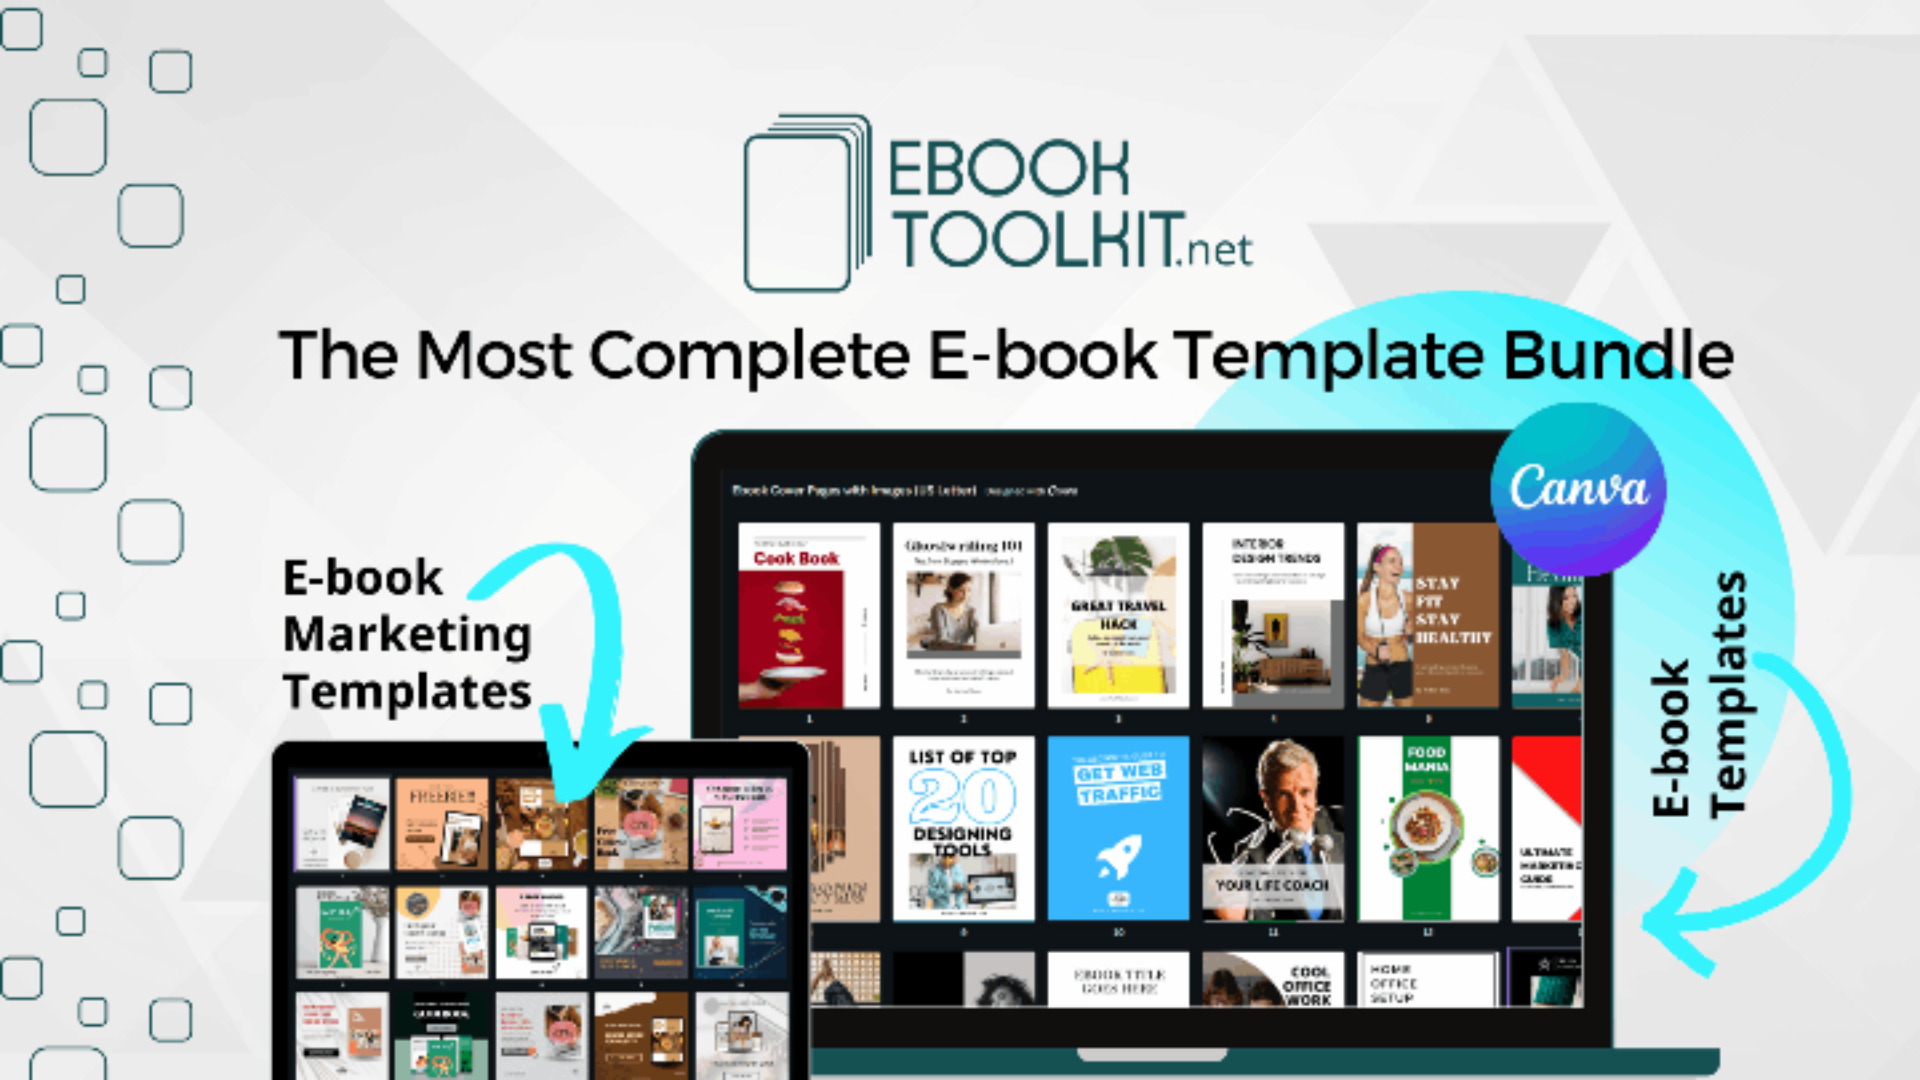 Lifetime Deal to Ebook Toolkit: FullAccess Pass for $49